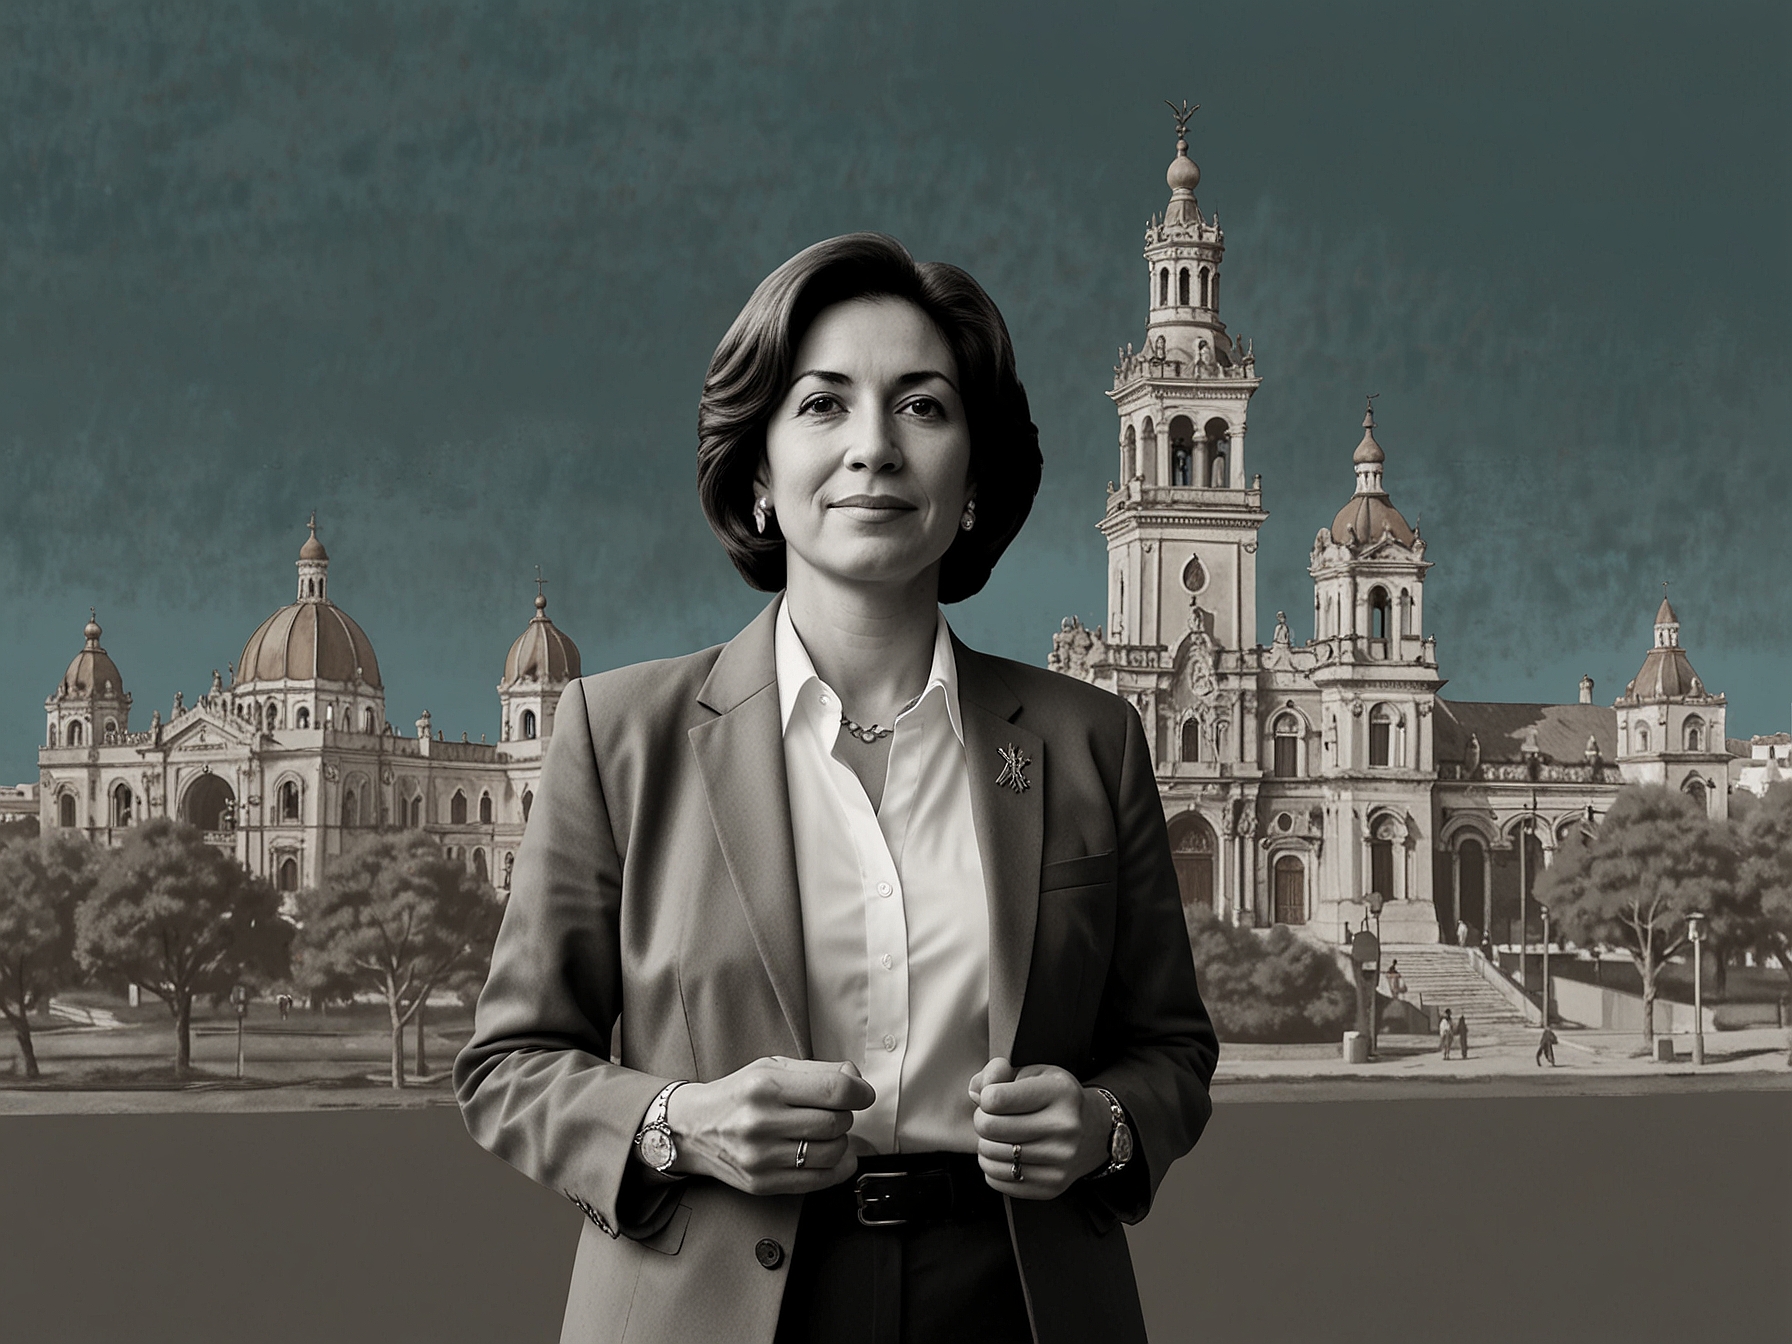 Image showing Claudia Sheinbaum, the Mayor of Mexico City, standing with an empty fist. This photo is crucial as it highlights the original context before digital alteration added a menorah.